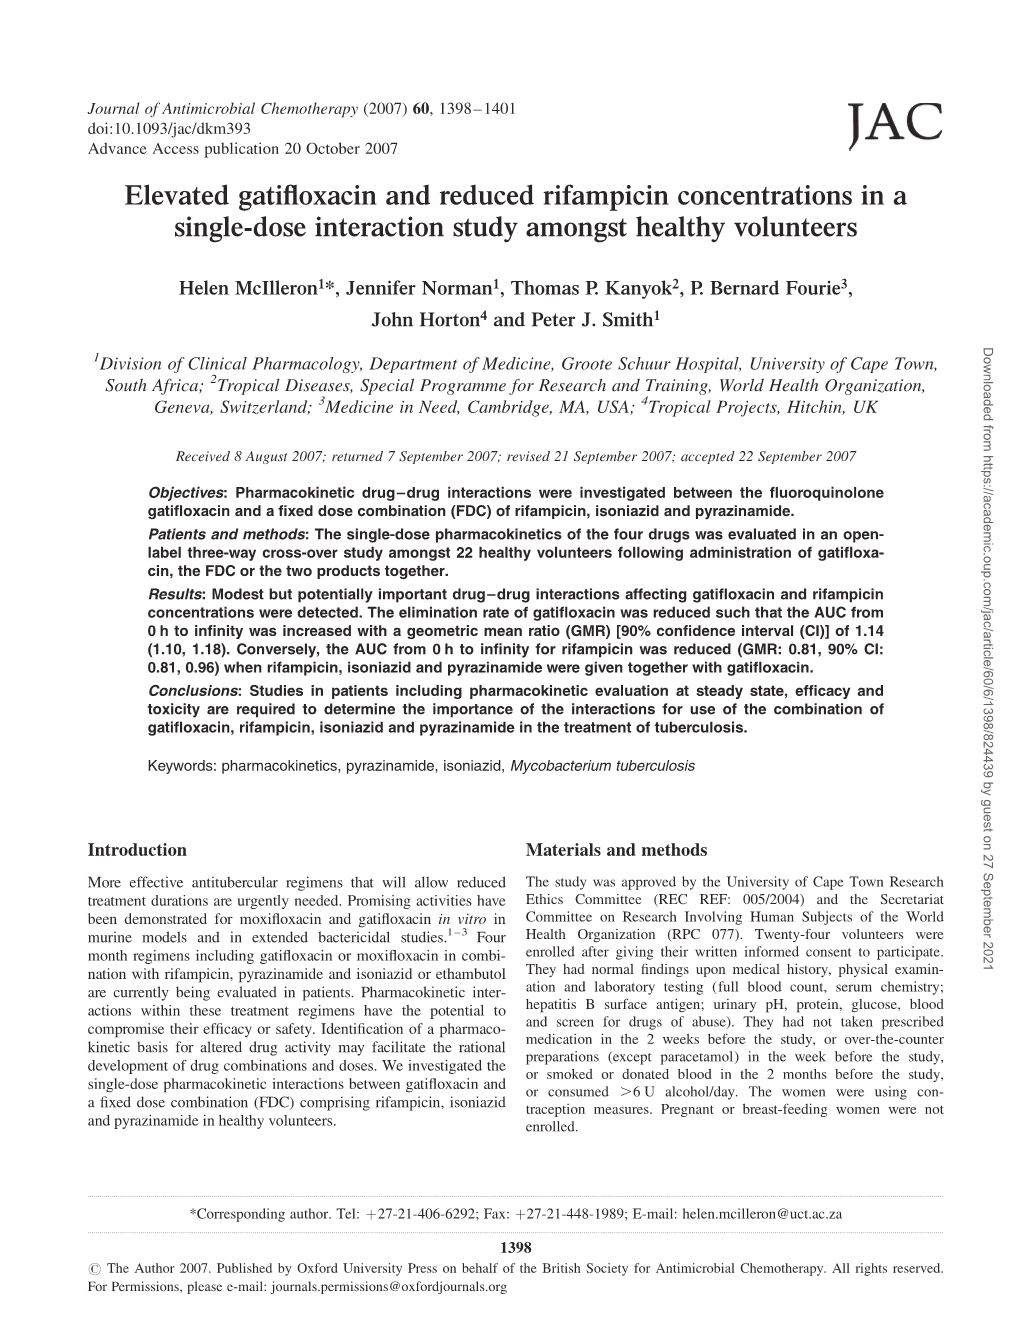 Elevated Gatifloxacin and Reduced Rifampicin Concentrations in a Single